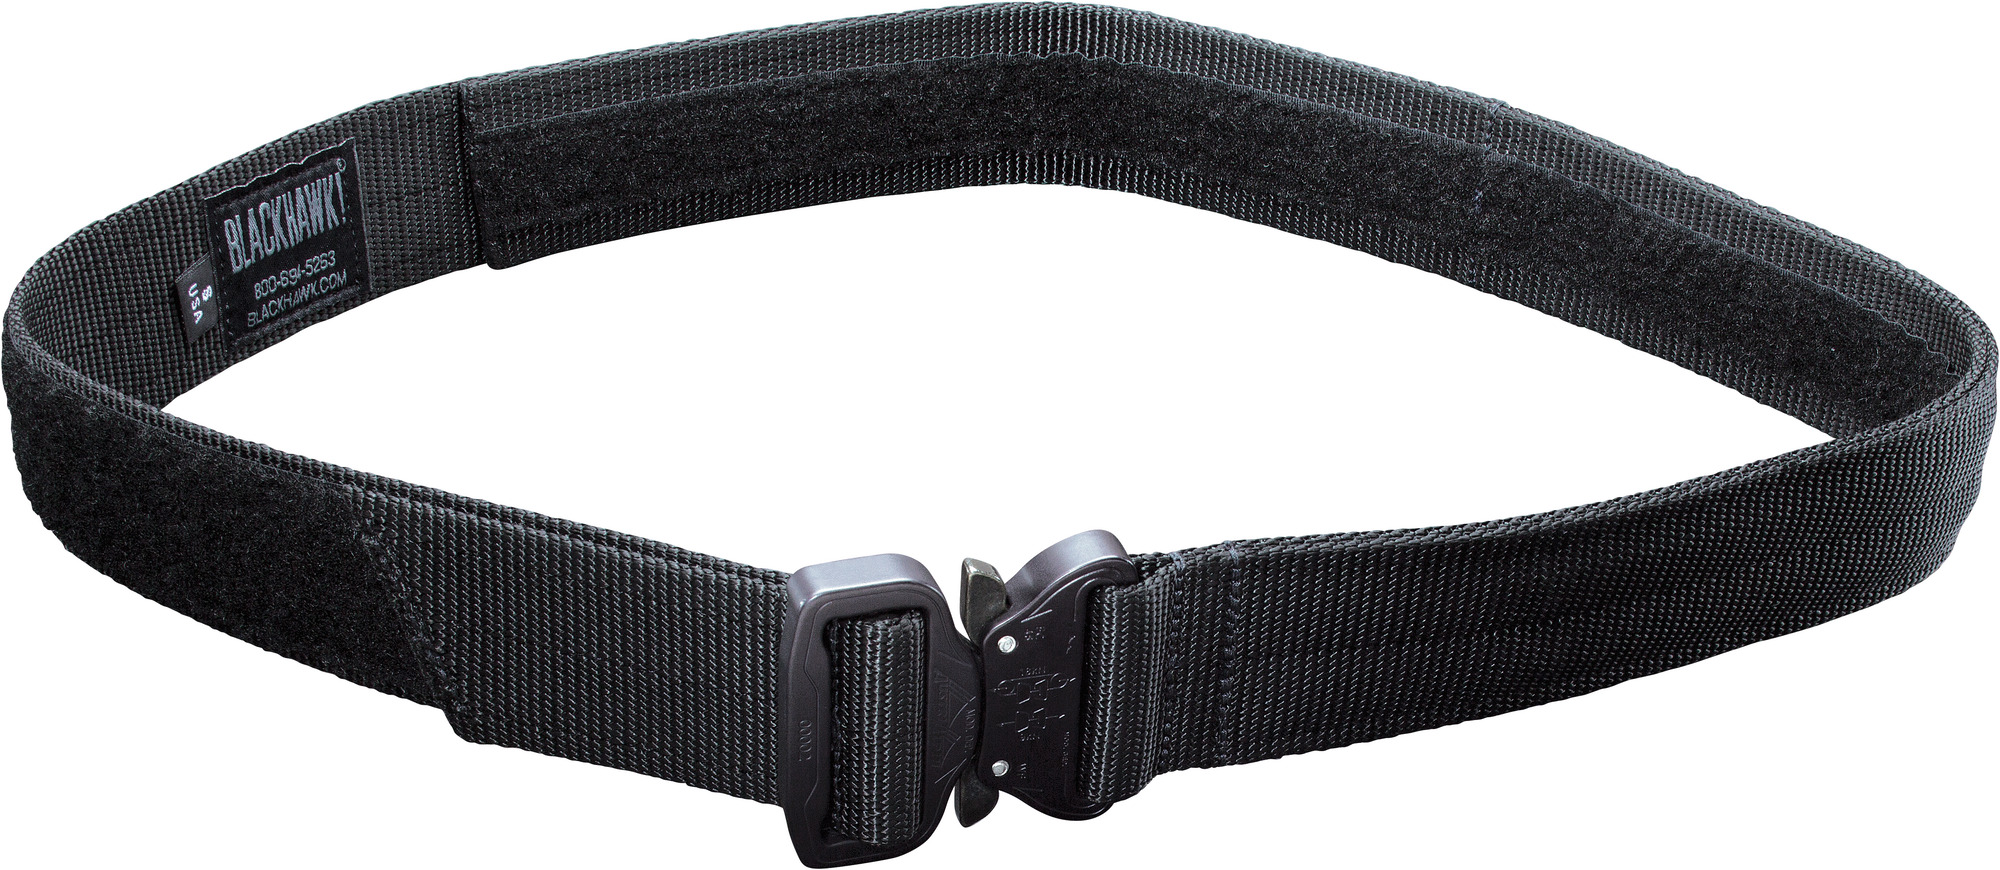 Buy Instructor's Belt with Cobra Buckle And More | Blackhawk